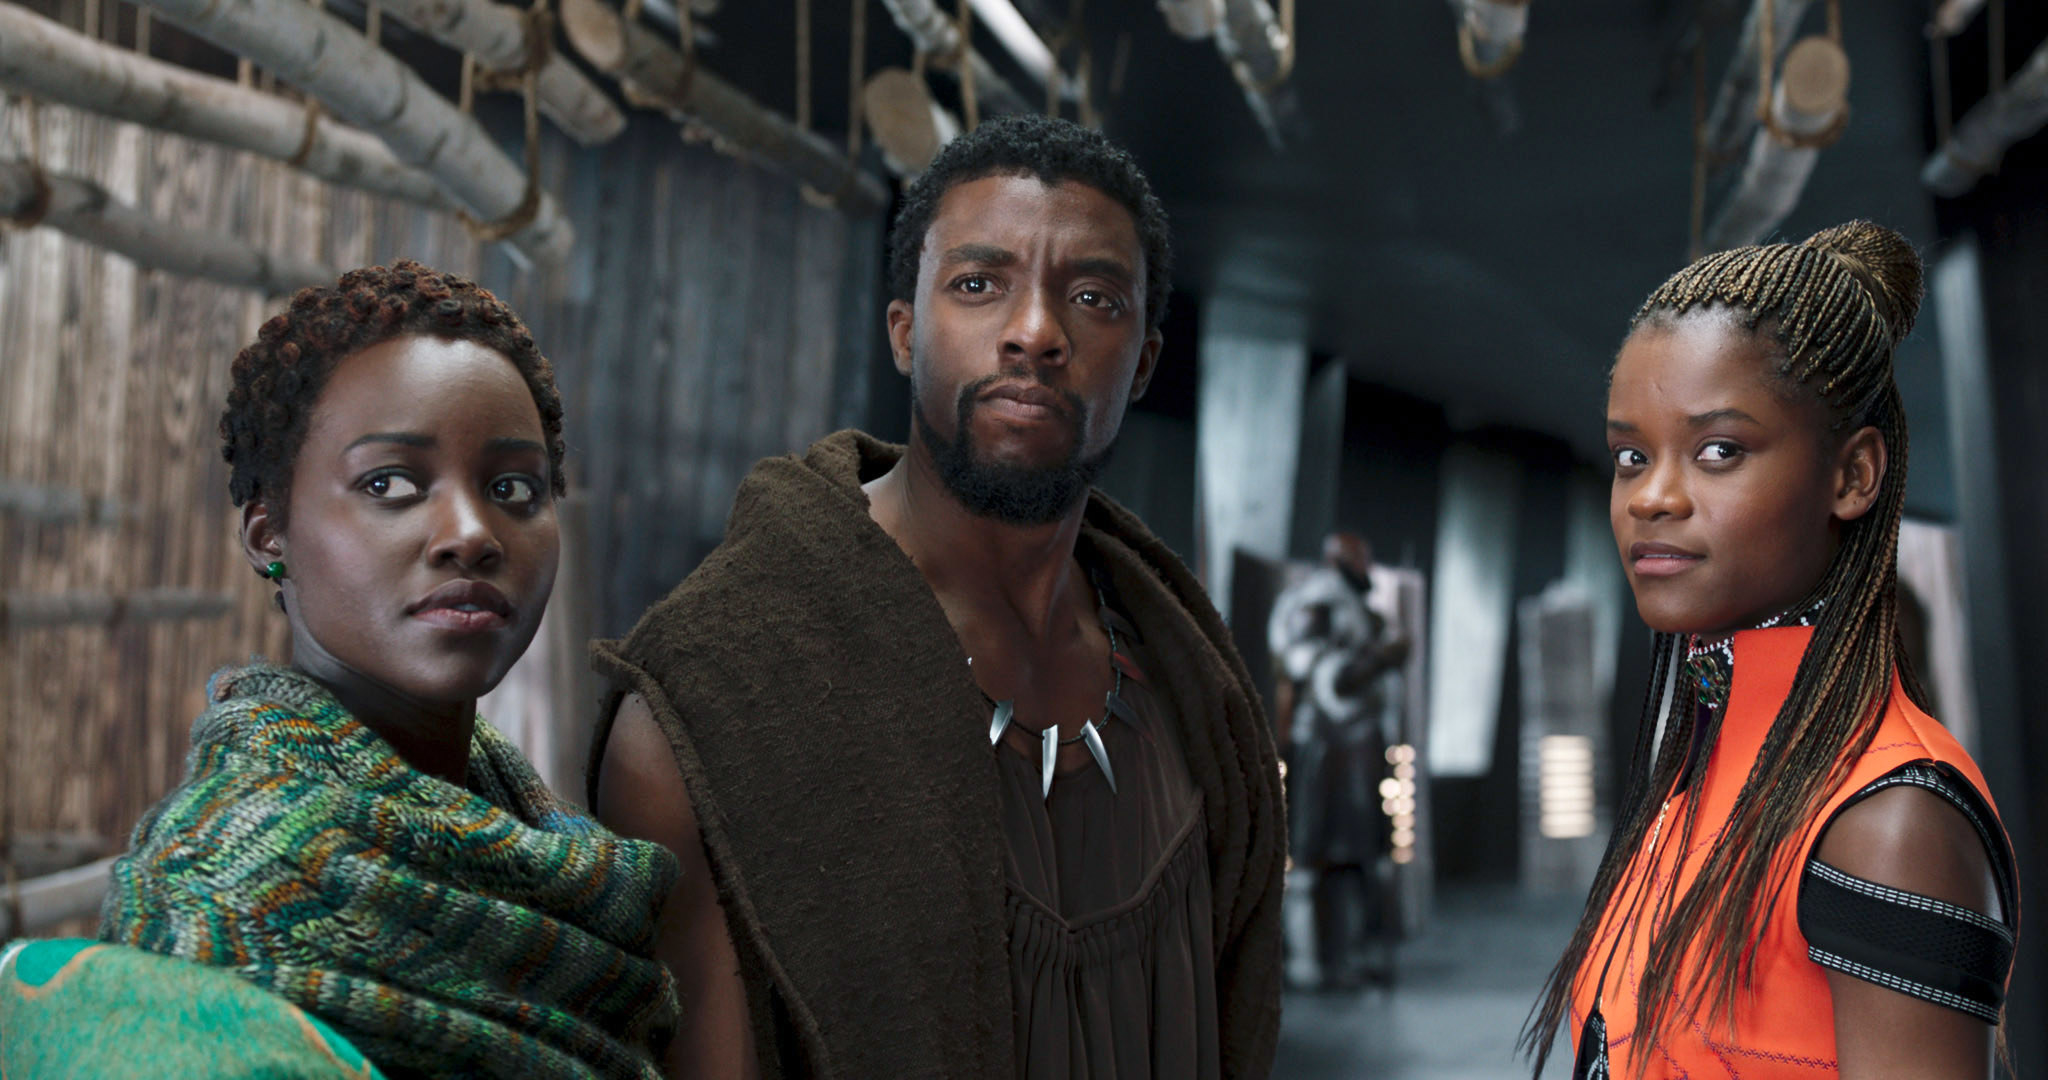 From left to right: Nakia, T&#x27;Challa, and Shuri looking off-screen